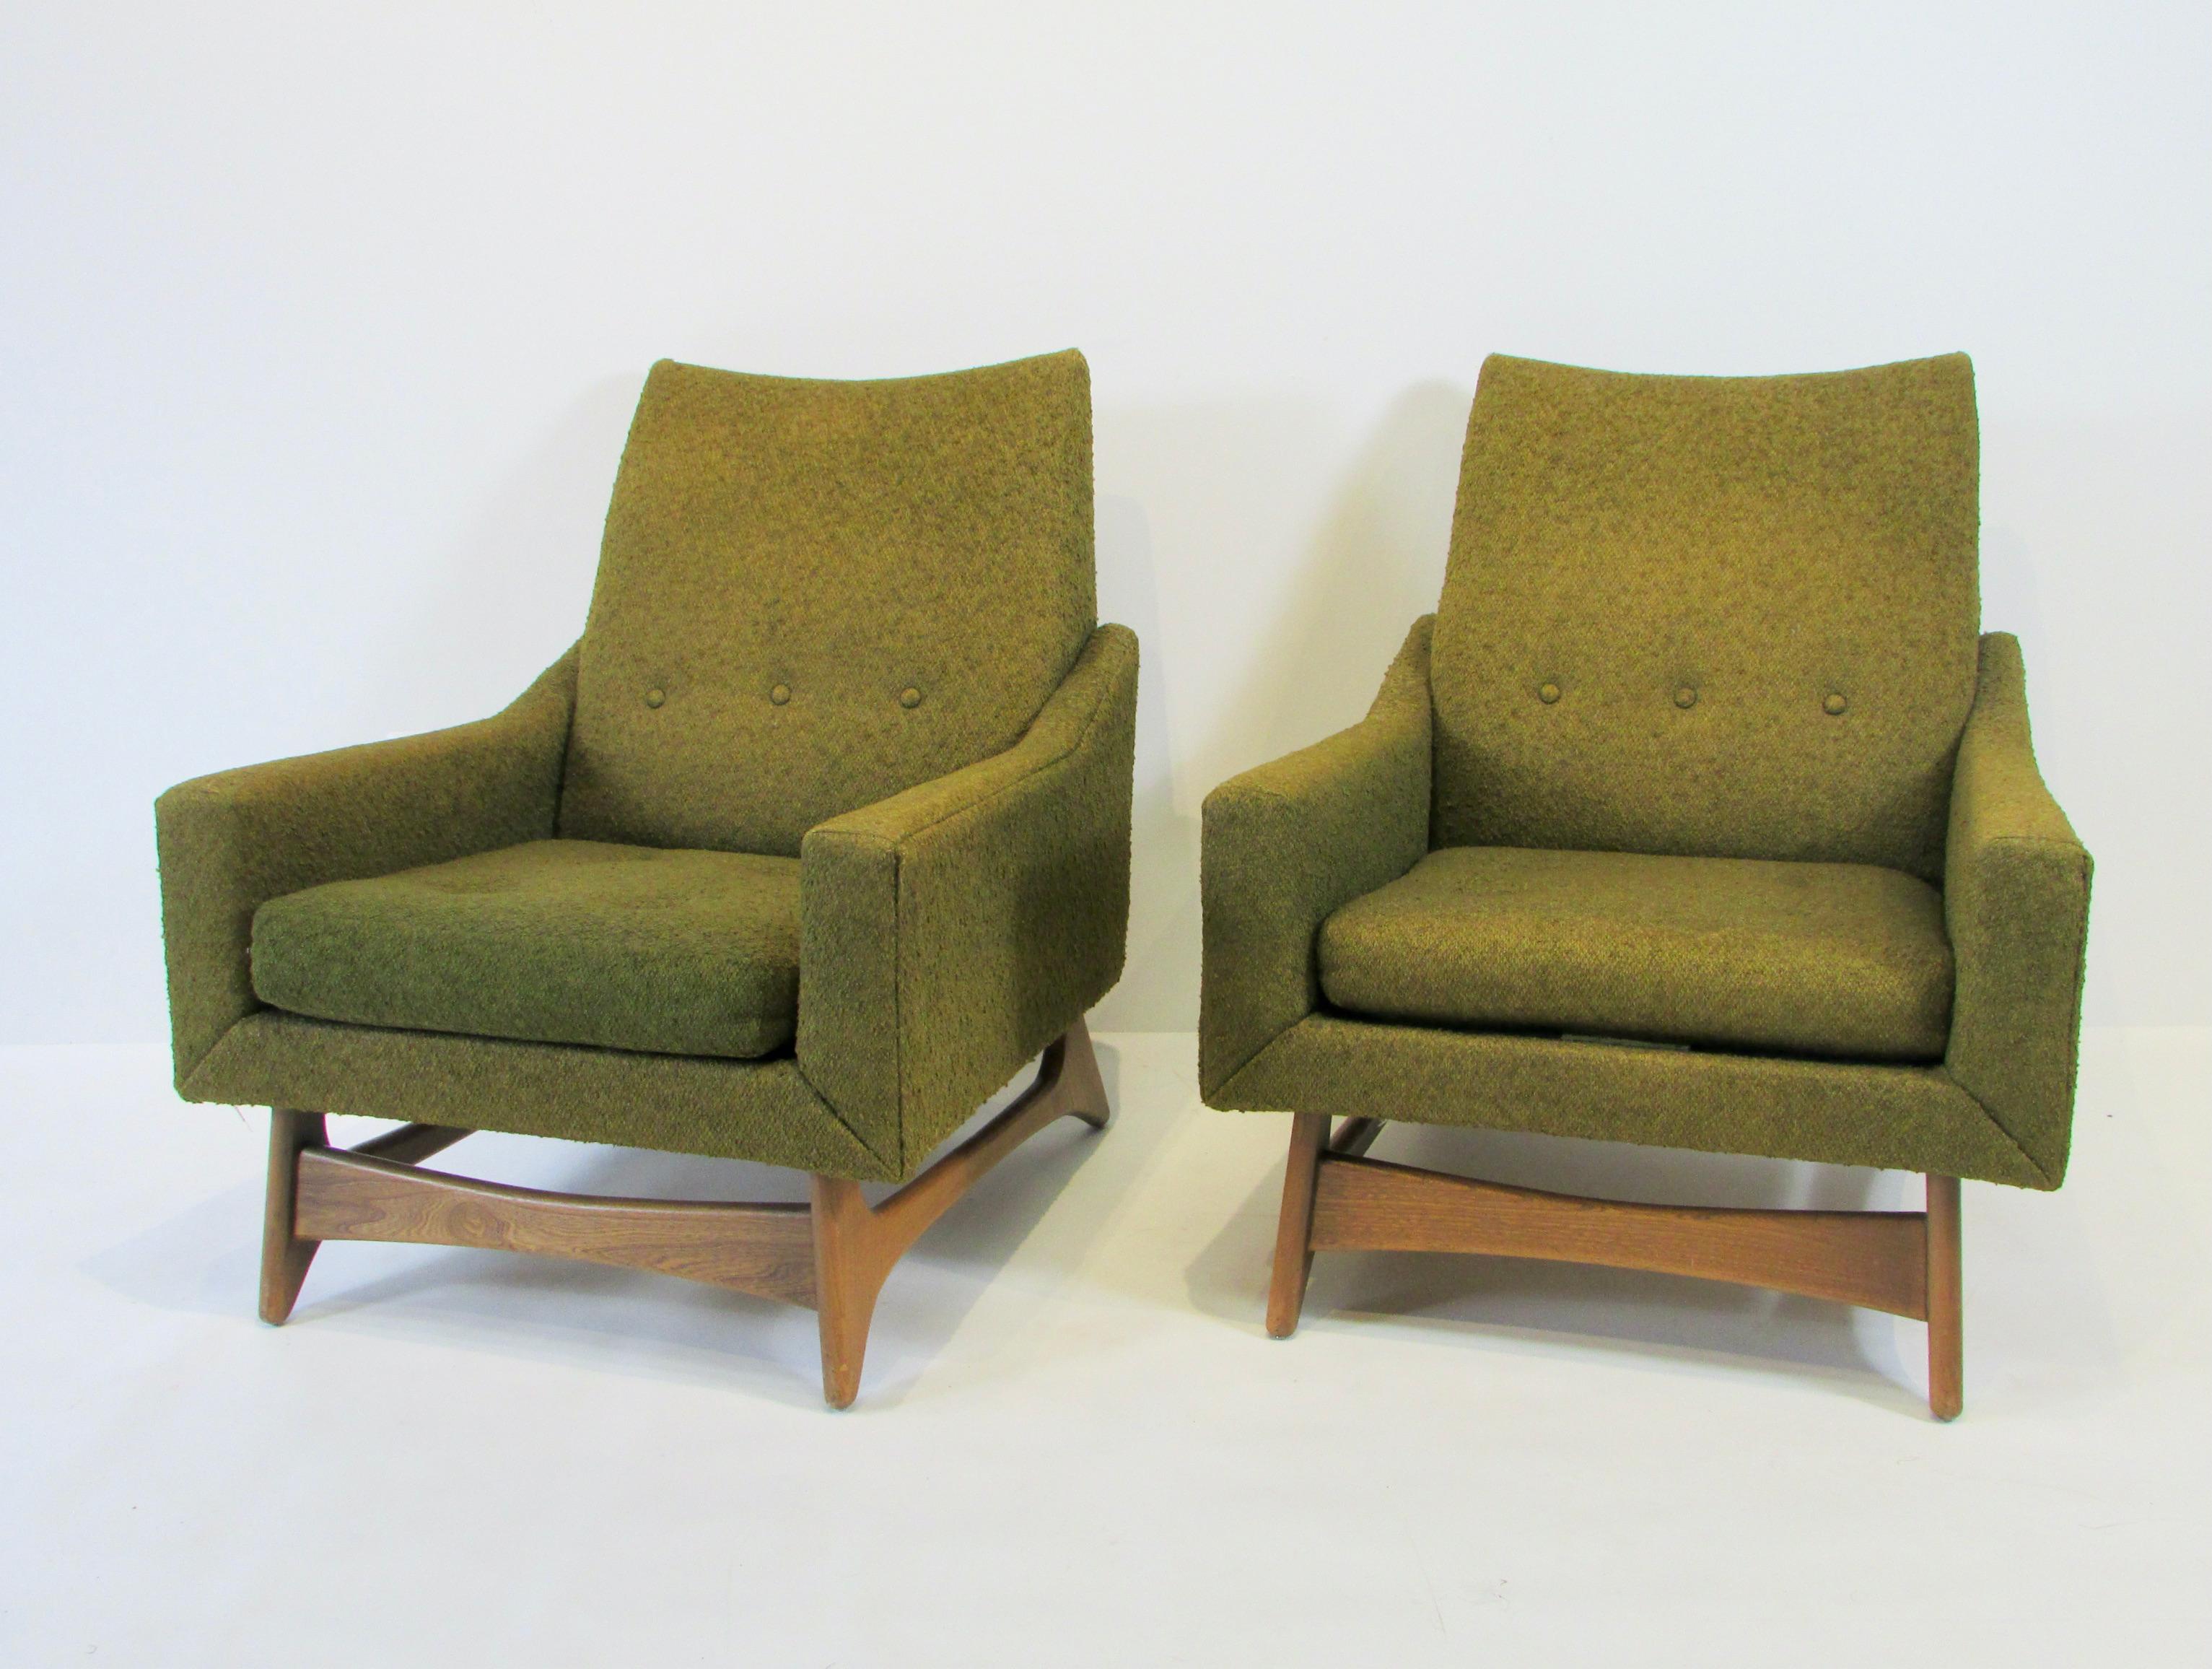 Pair of Kroehler armchairs from the leisure collection 1966. Upholstered frames on walnut bases. Chairs are as found originals with original label on one chair. Upholstery is faded and worn. Ready for clients own recovering.